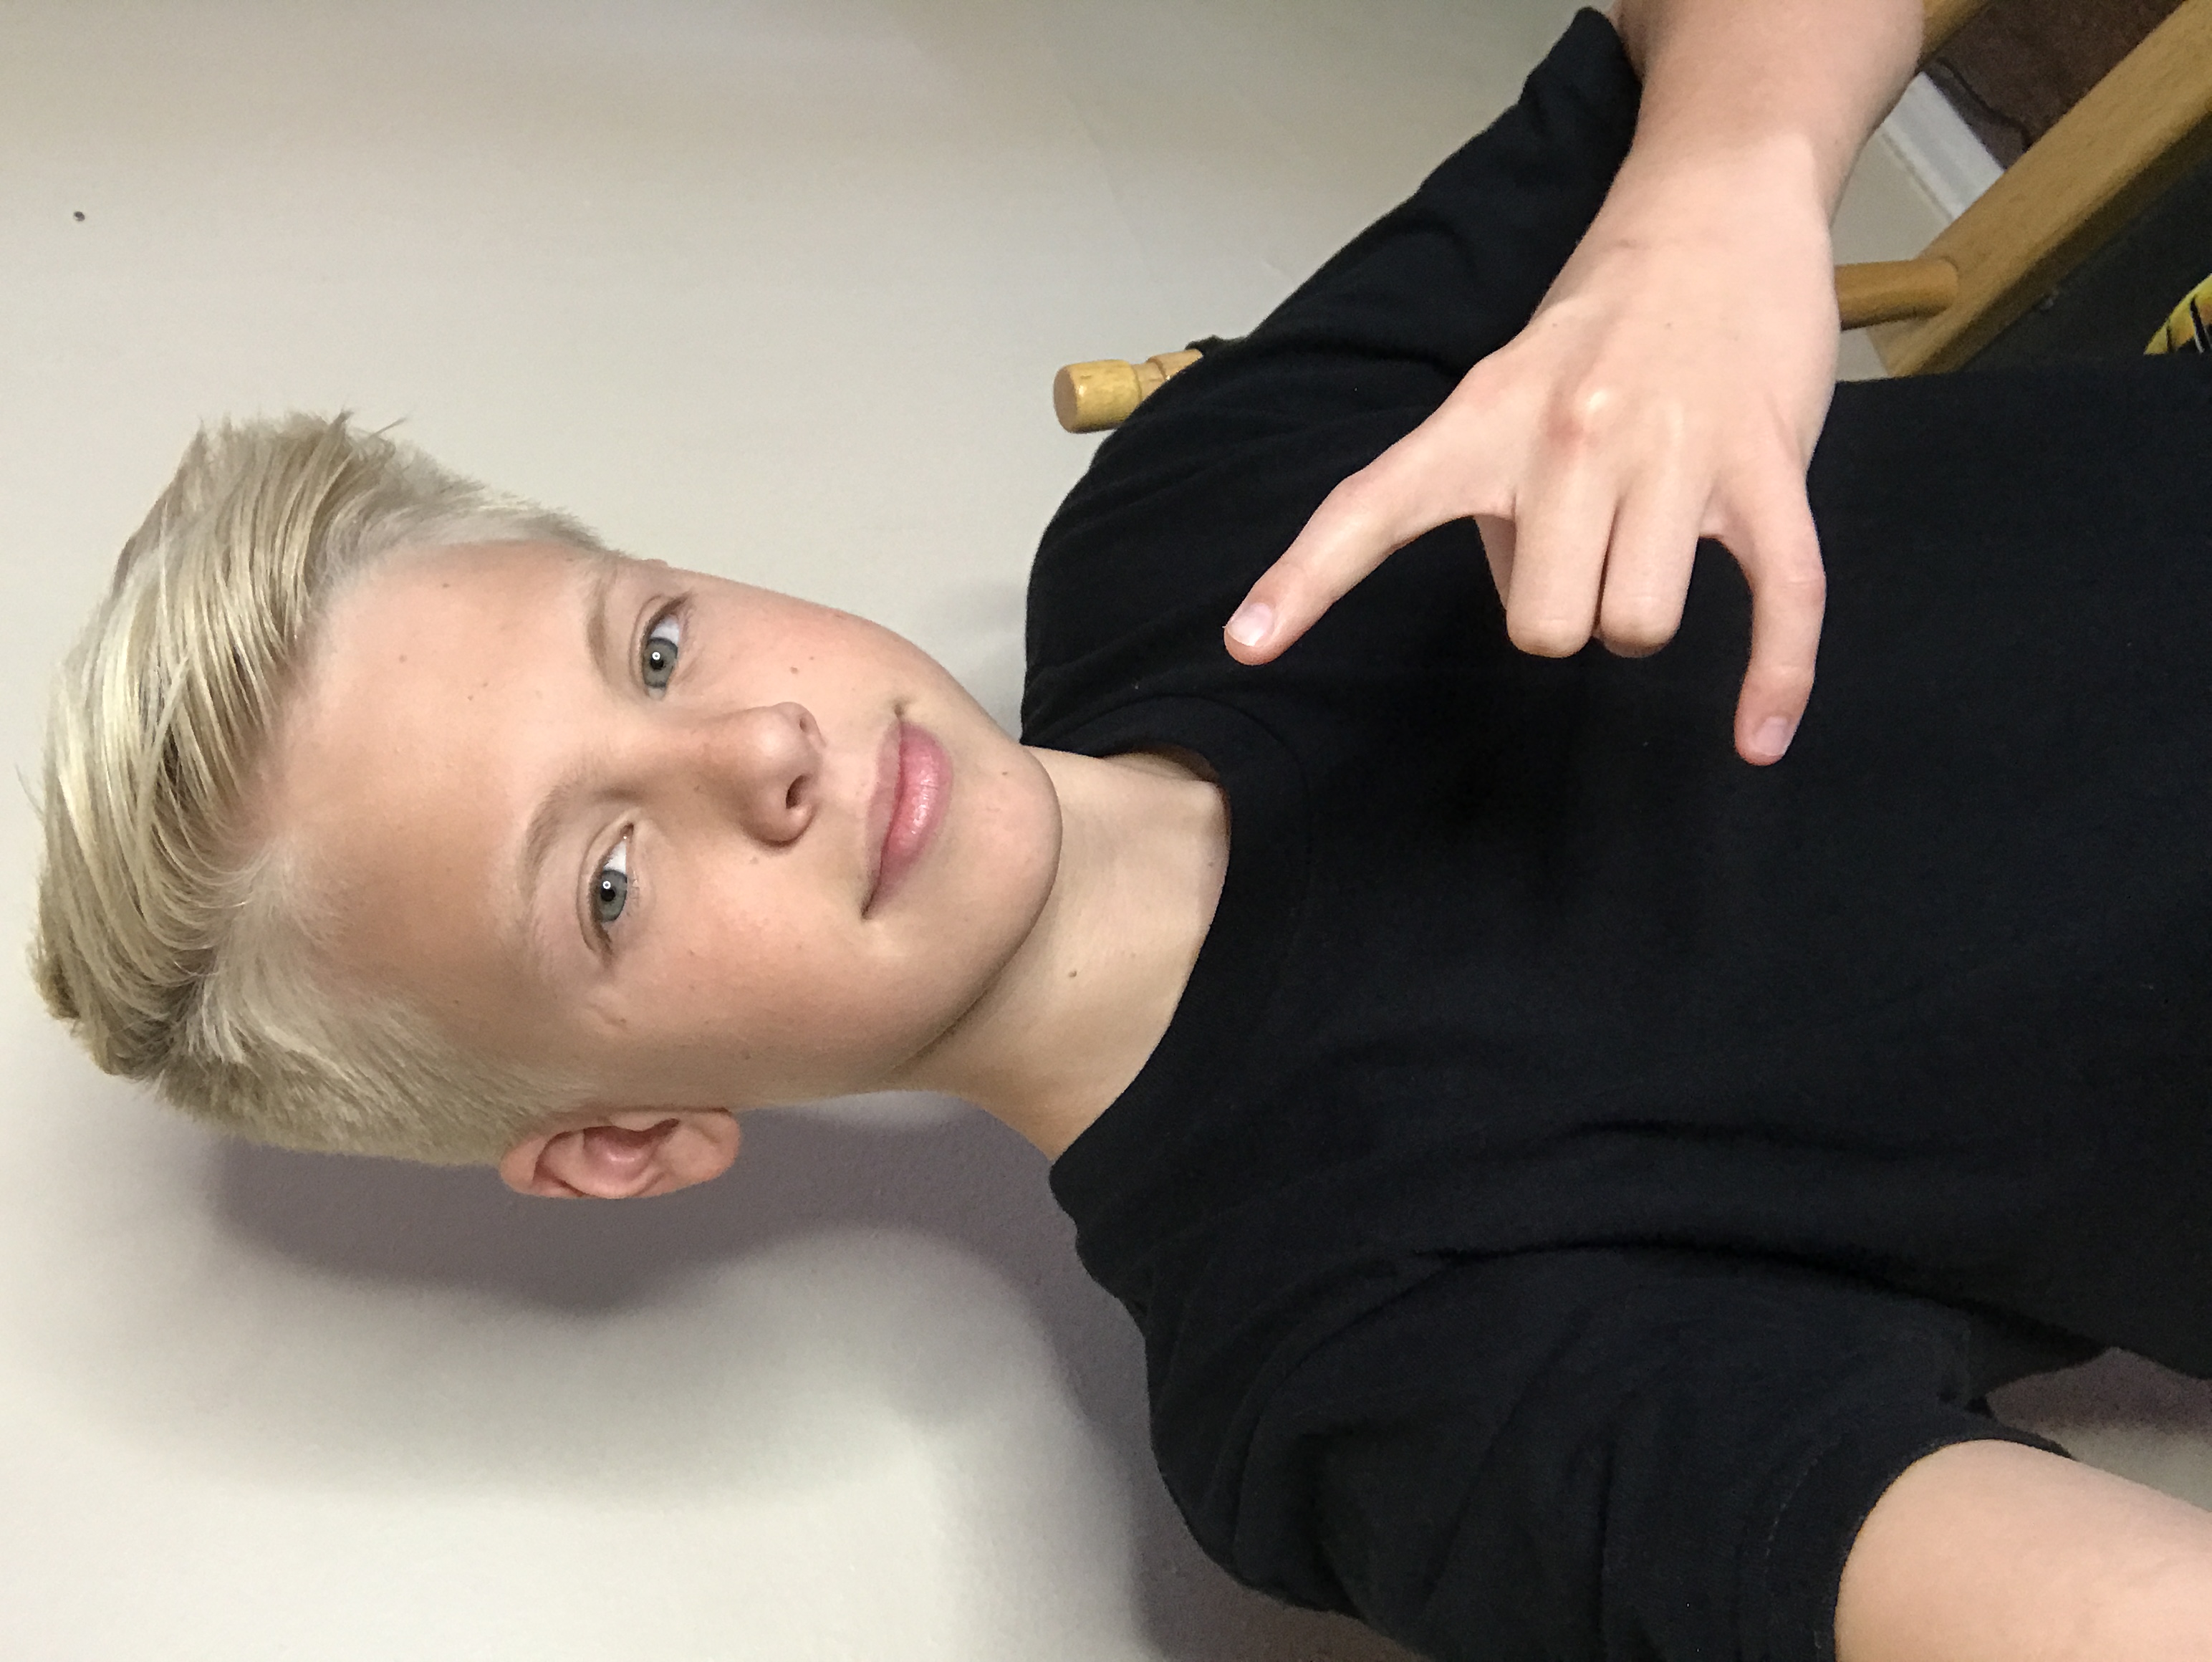 Carson Lueders Reveals Fun Facts About Himself